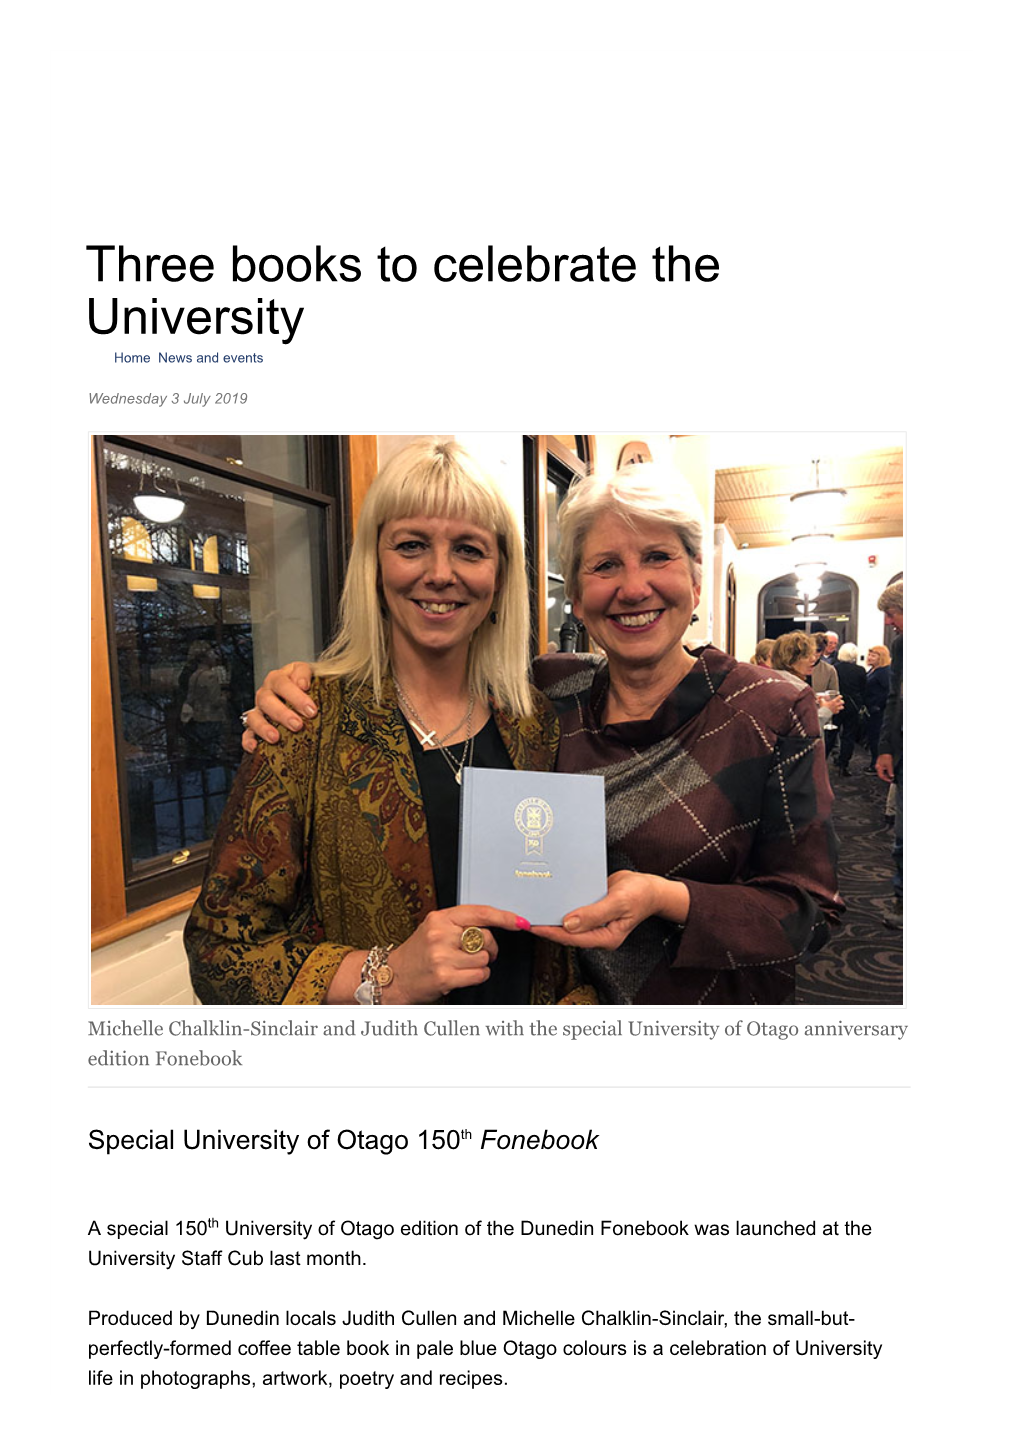 Three Books to Celebrate the University Home News and Events